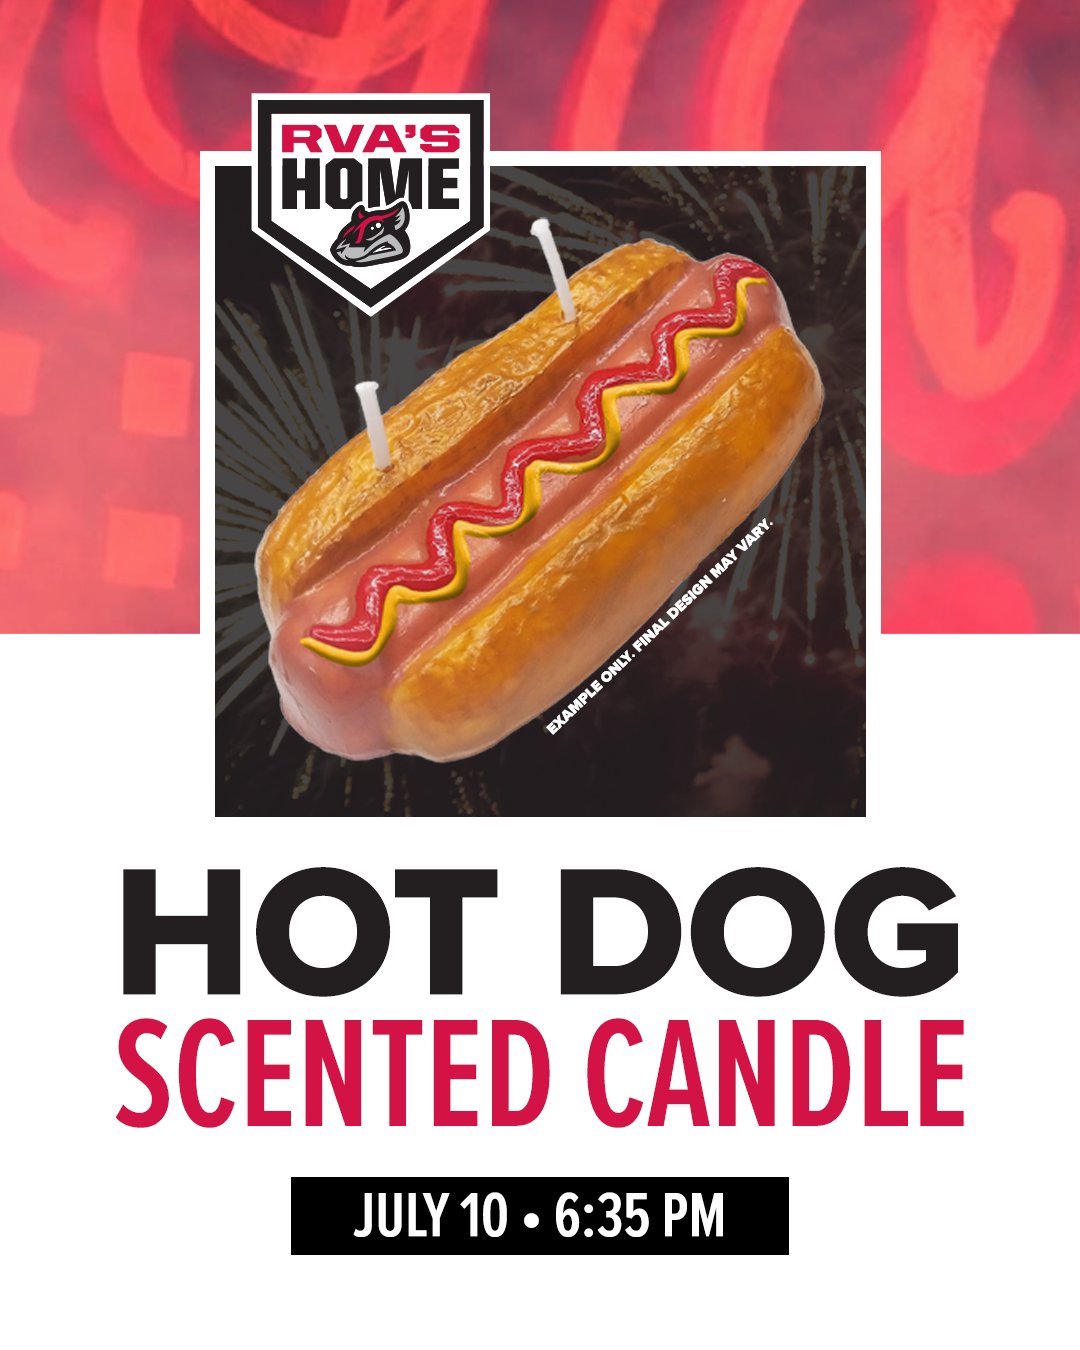 Hot Dog Scented Candle